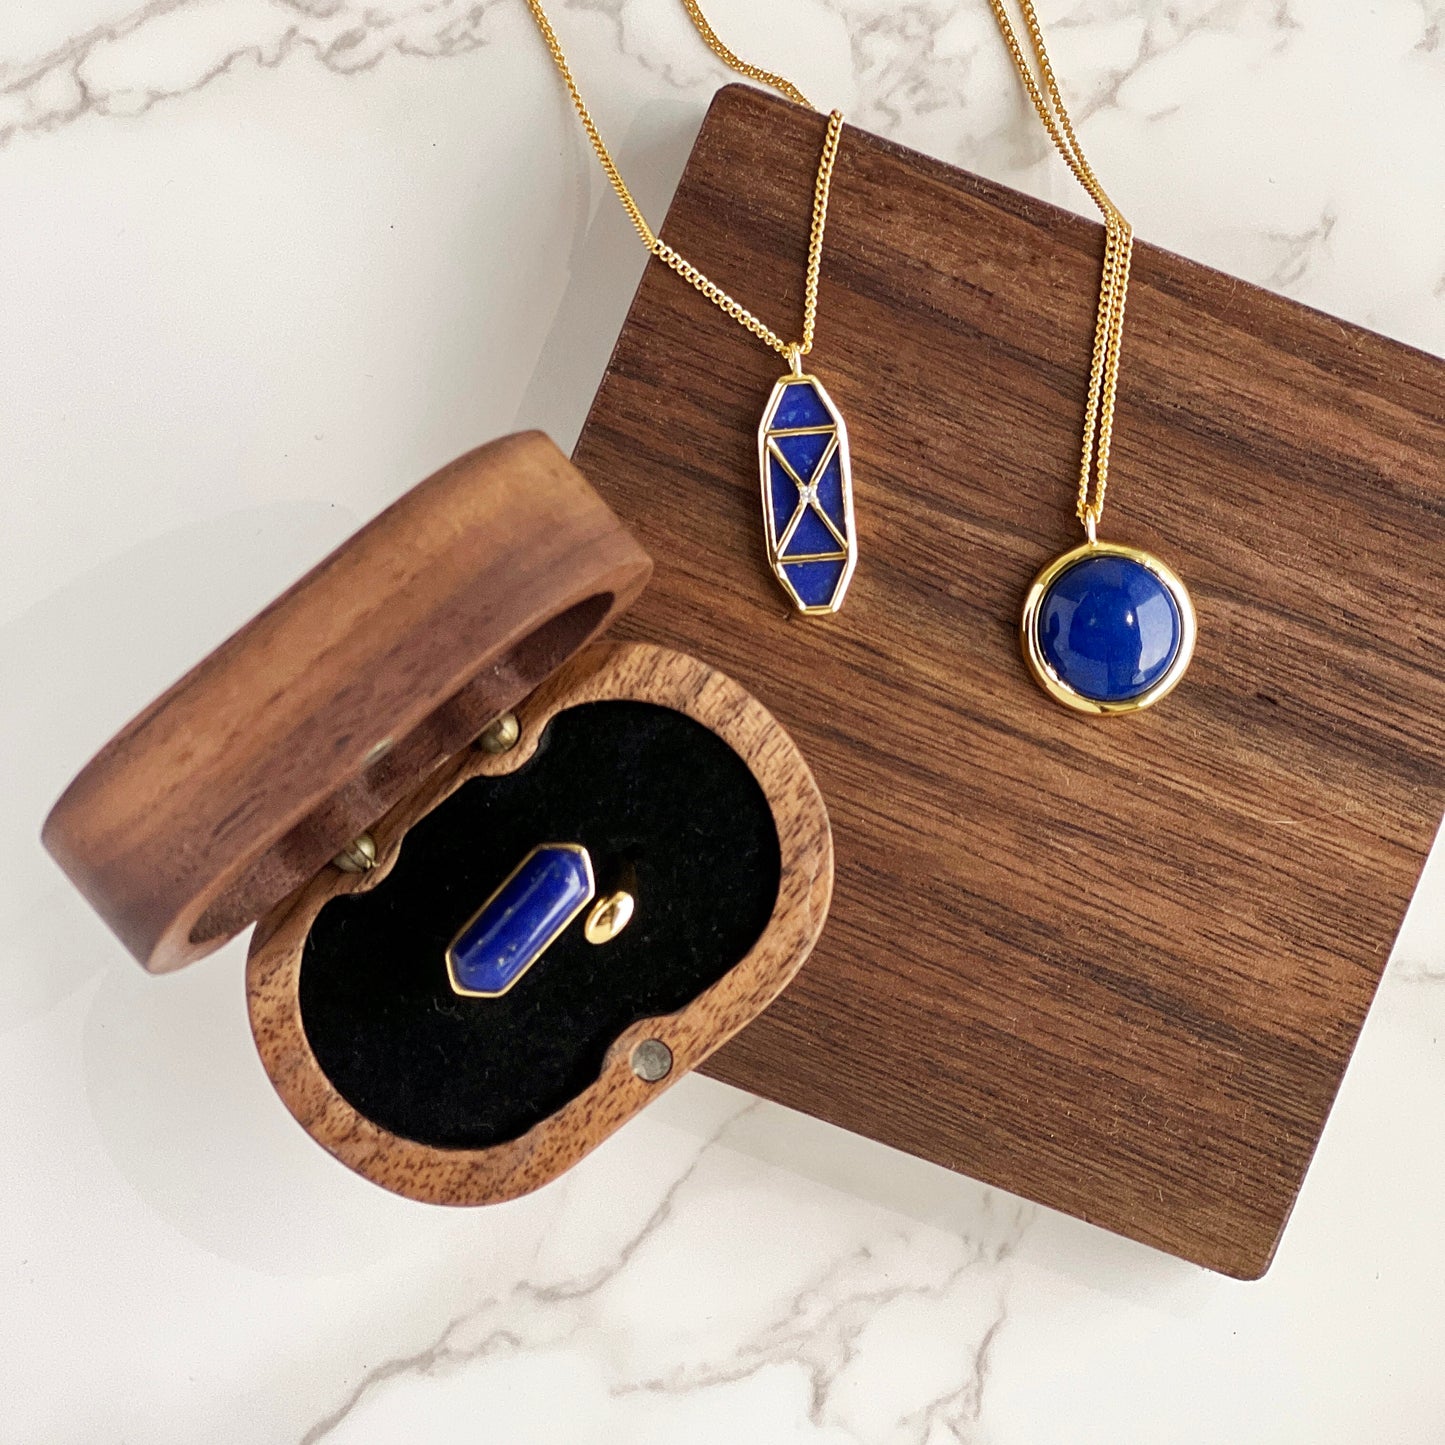 Lapis Lazuli Gemstone Pendant Necklace in Sterling Silver